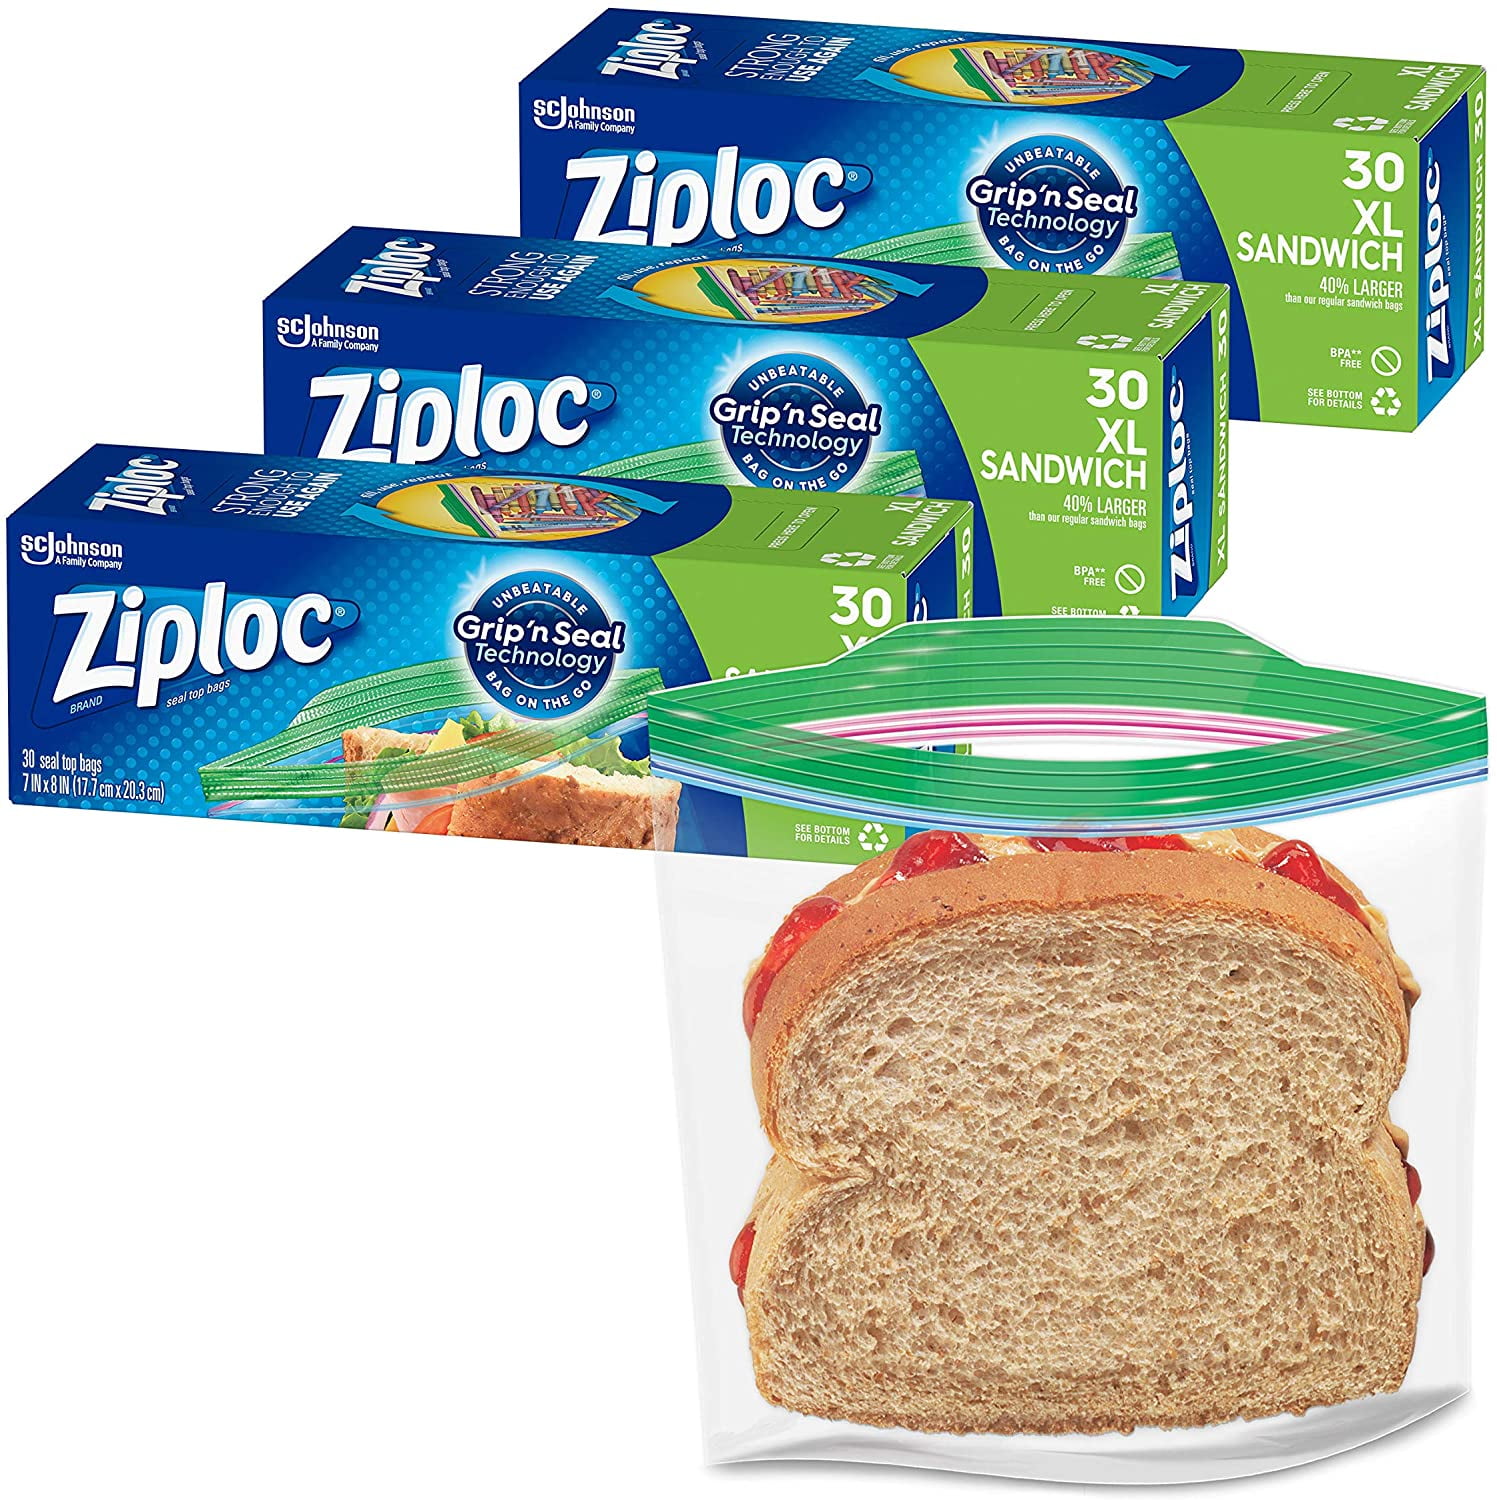 ZiplocÆ Brand Snack Bags with Grip 'n Seal Technology, 100 Count